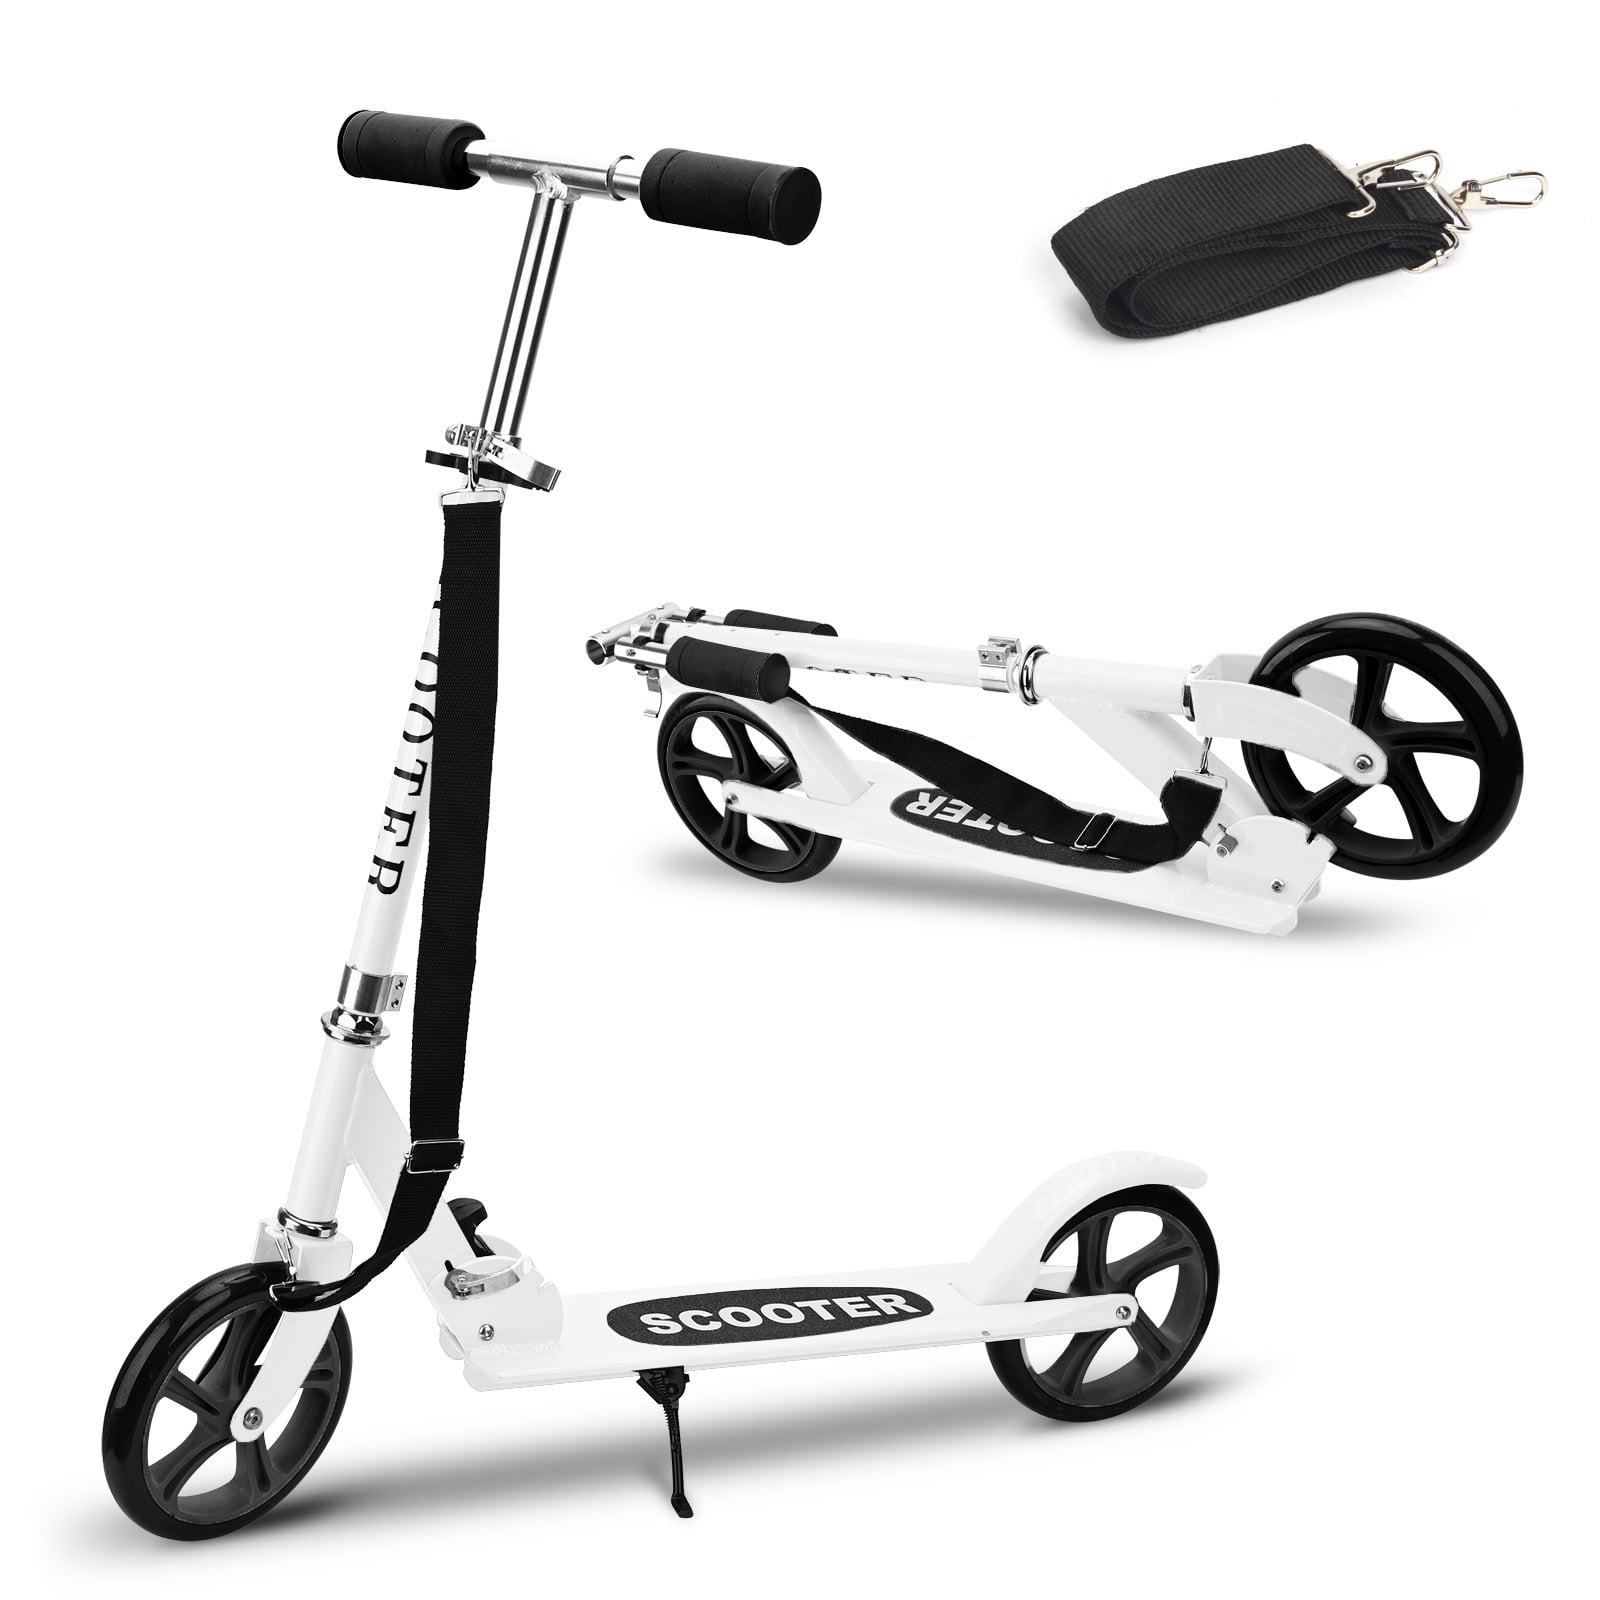 Portable Scooter Suspension Push Scooter Large 200mm Wheels For Teens Adult 